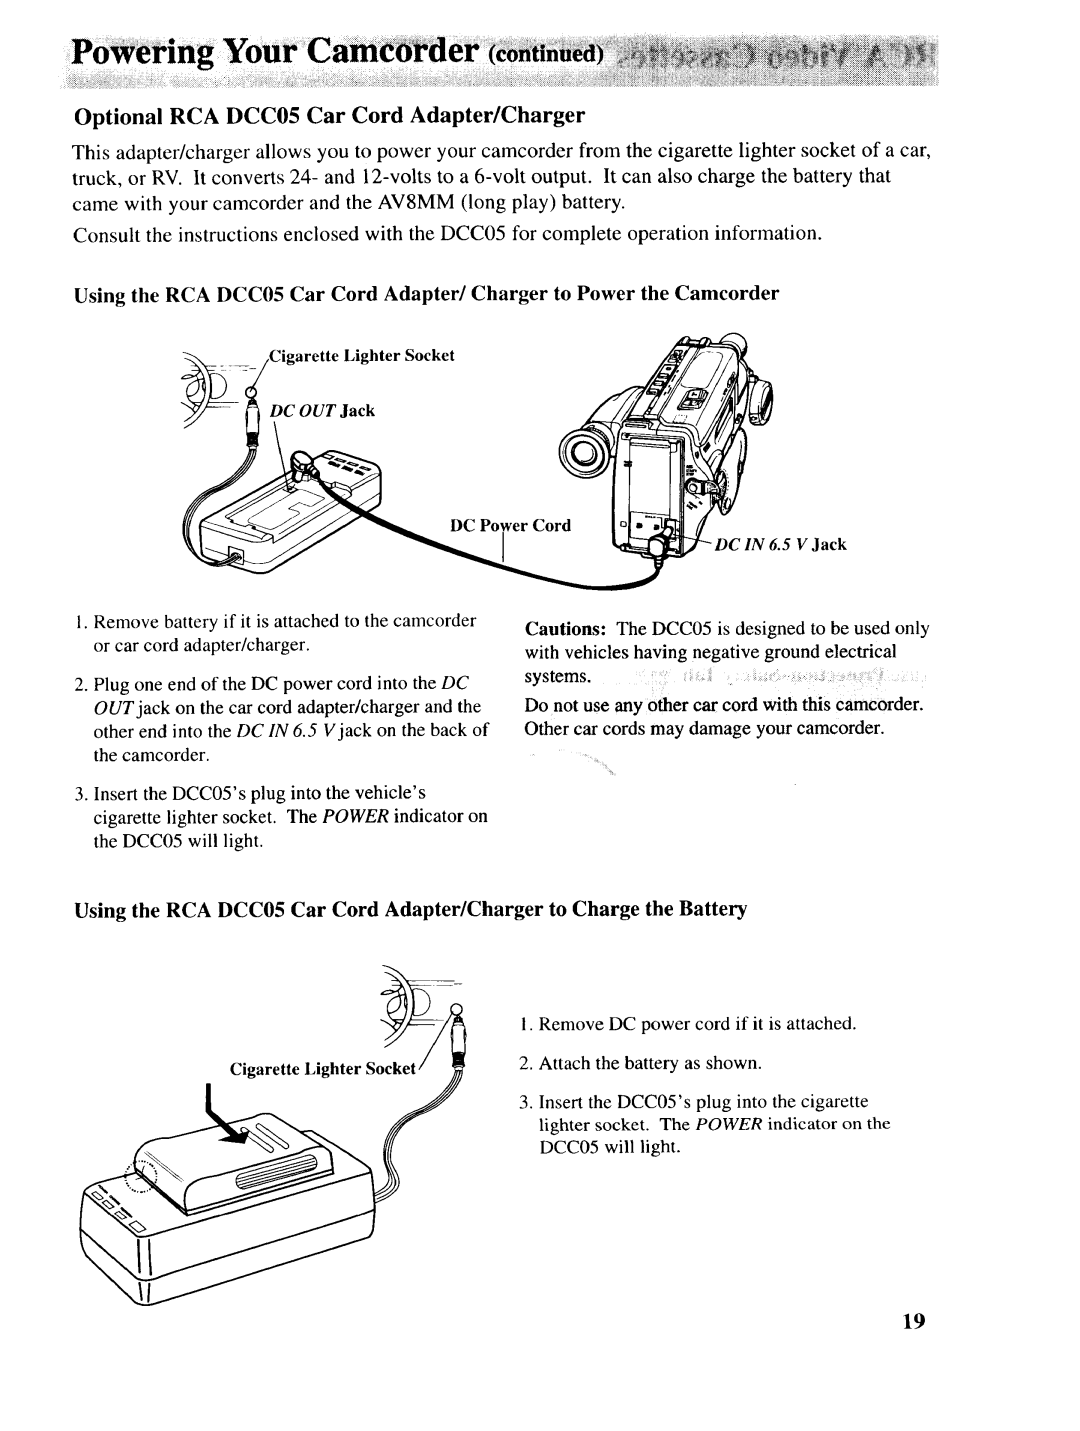 RCA P46729, P46730, P46728 owner manual Optional RCA DCC05 Car Cord Adapter/Charger, Lighter Socket, V Jack 